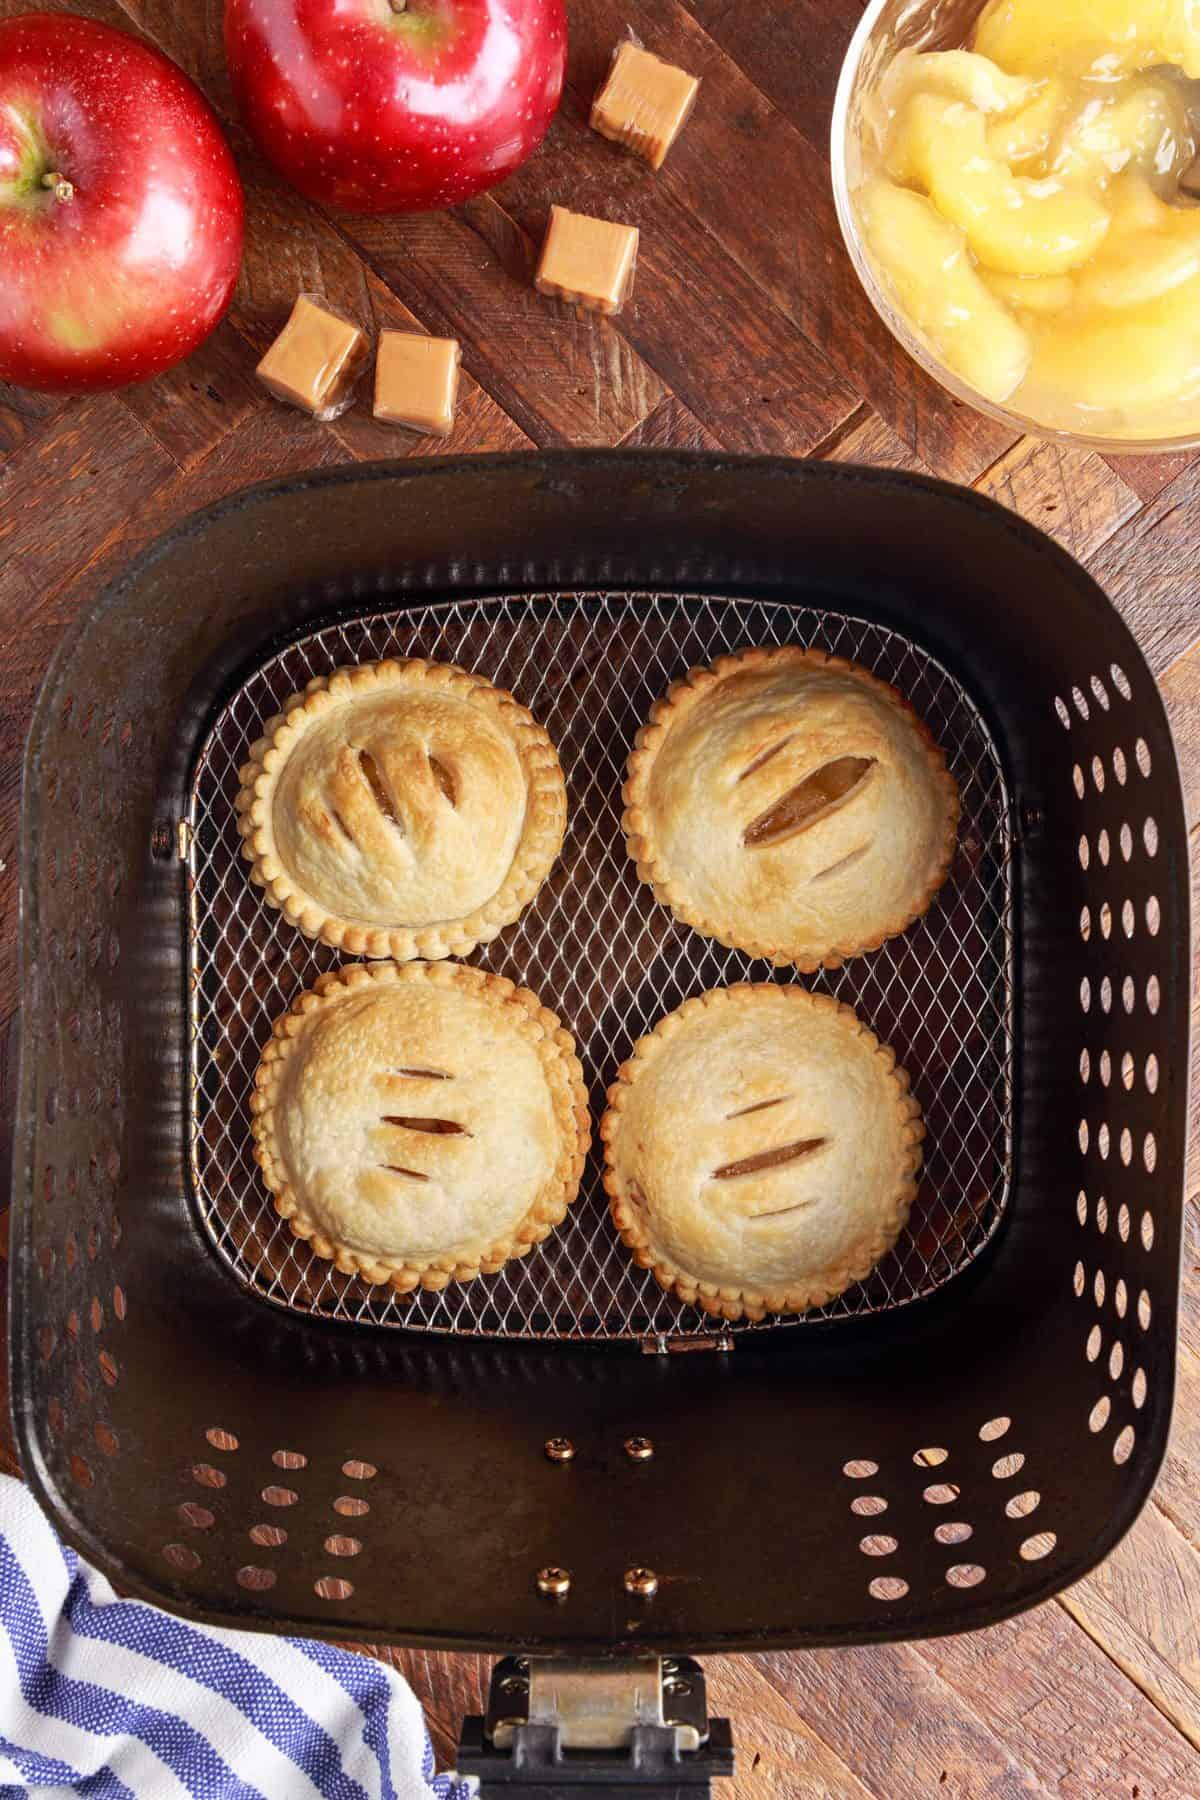 placing the pies in the air fryer to cook